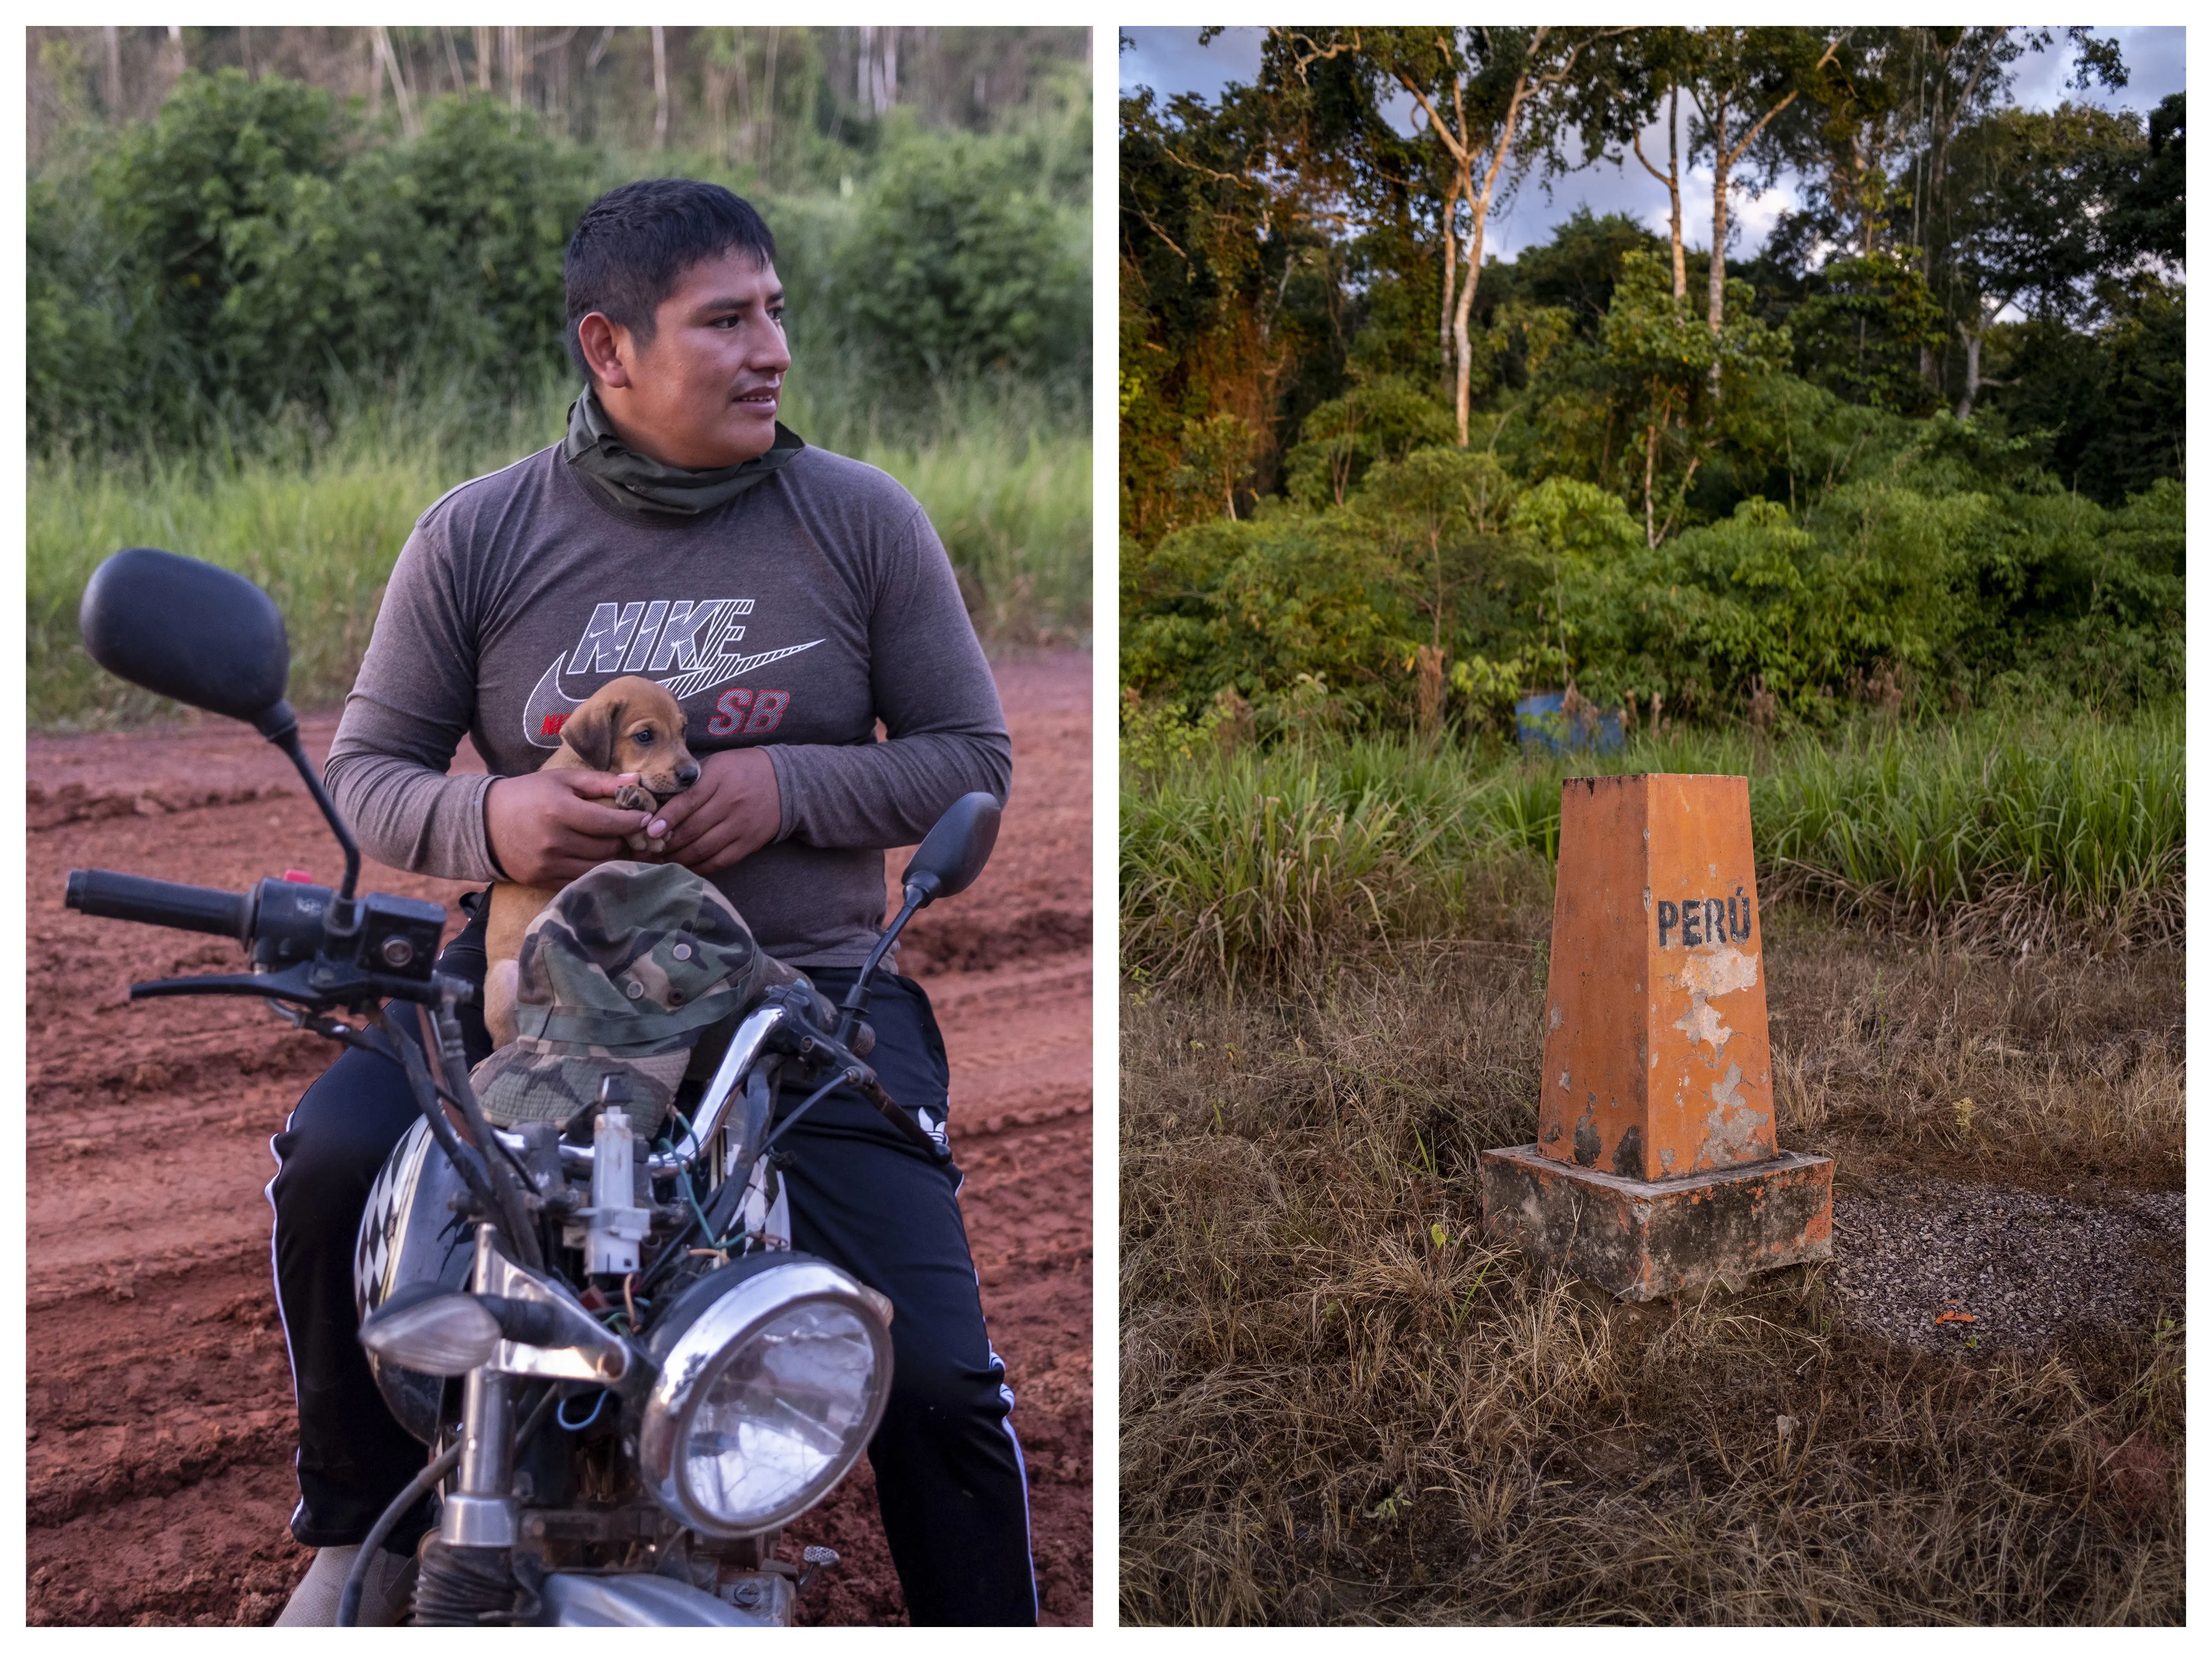 Right: a man on a motorcycle with a puppy in his lap. Right: a metal cone denoting the border between 